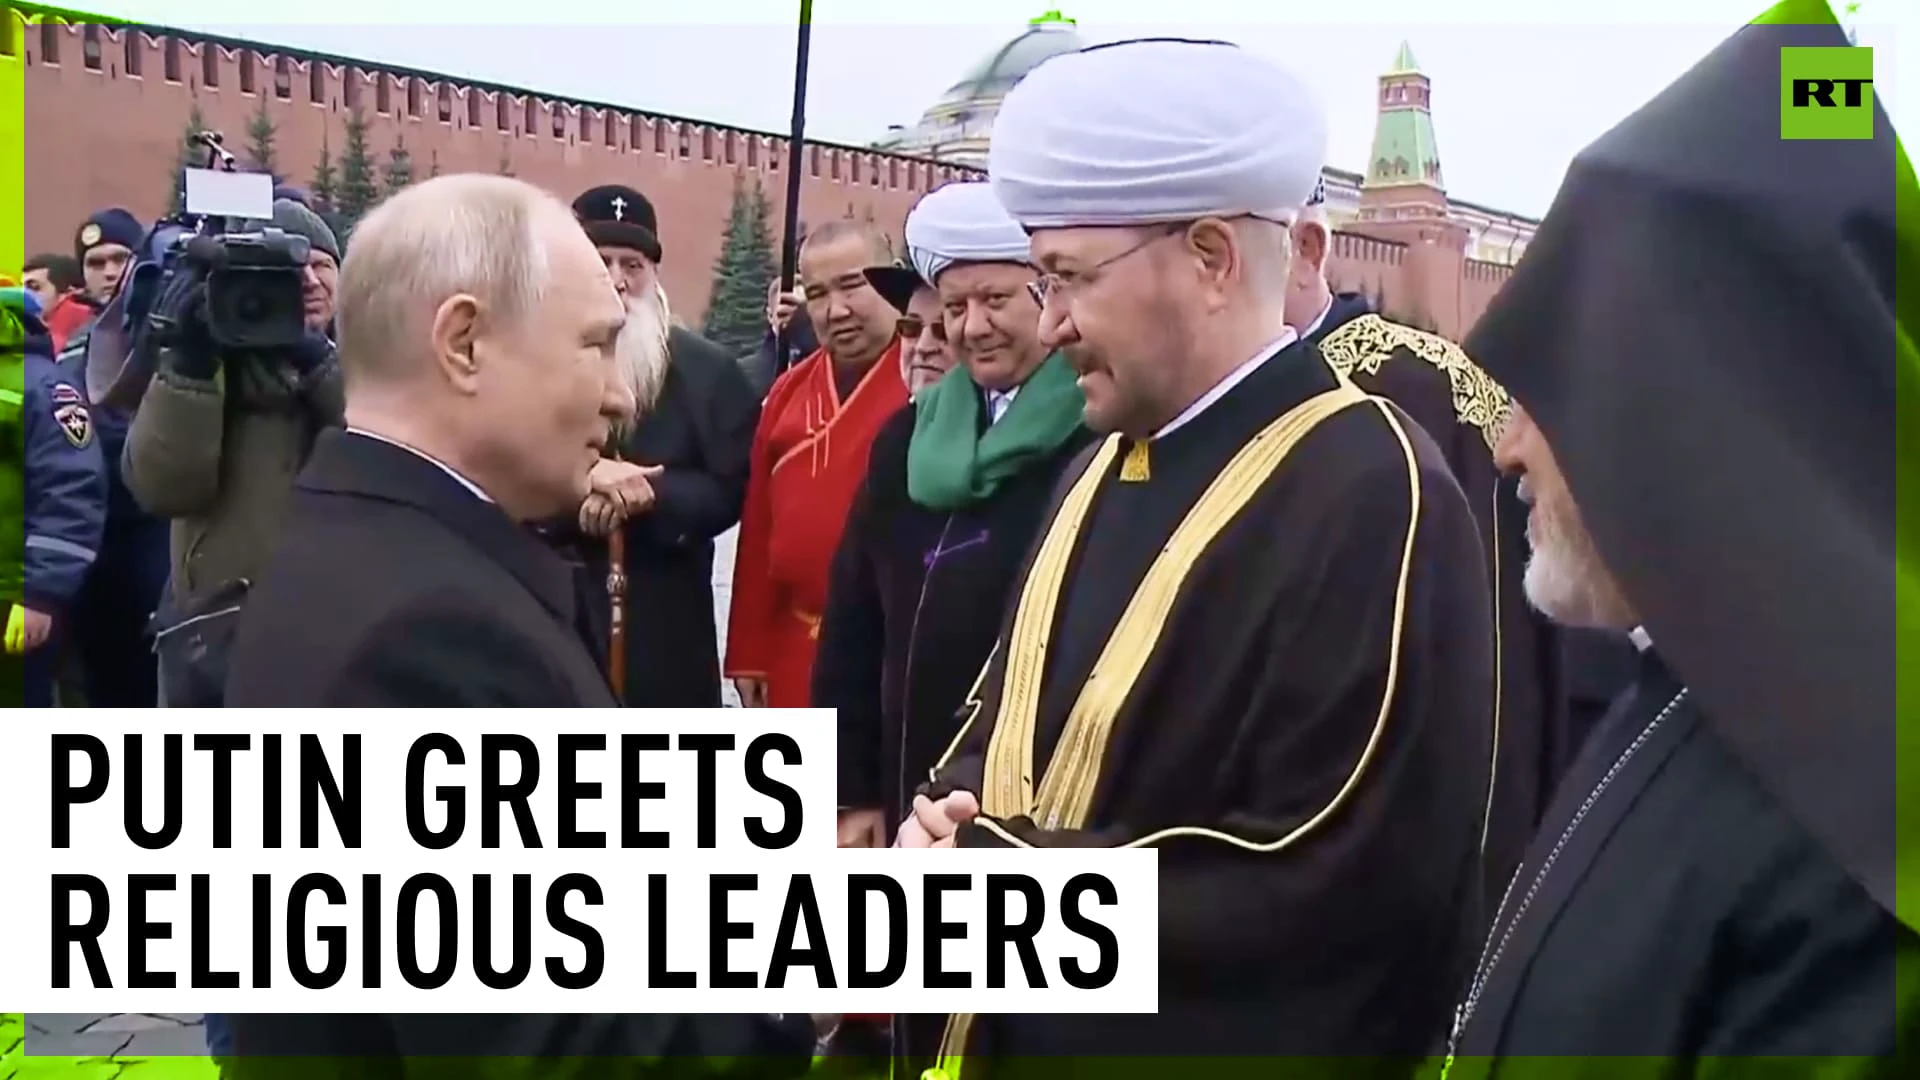 National Unity Day | Putin greets Russian religious leaders